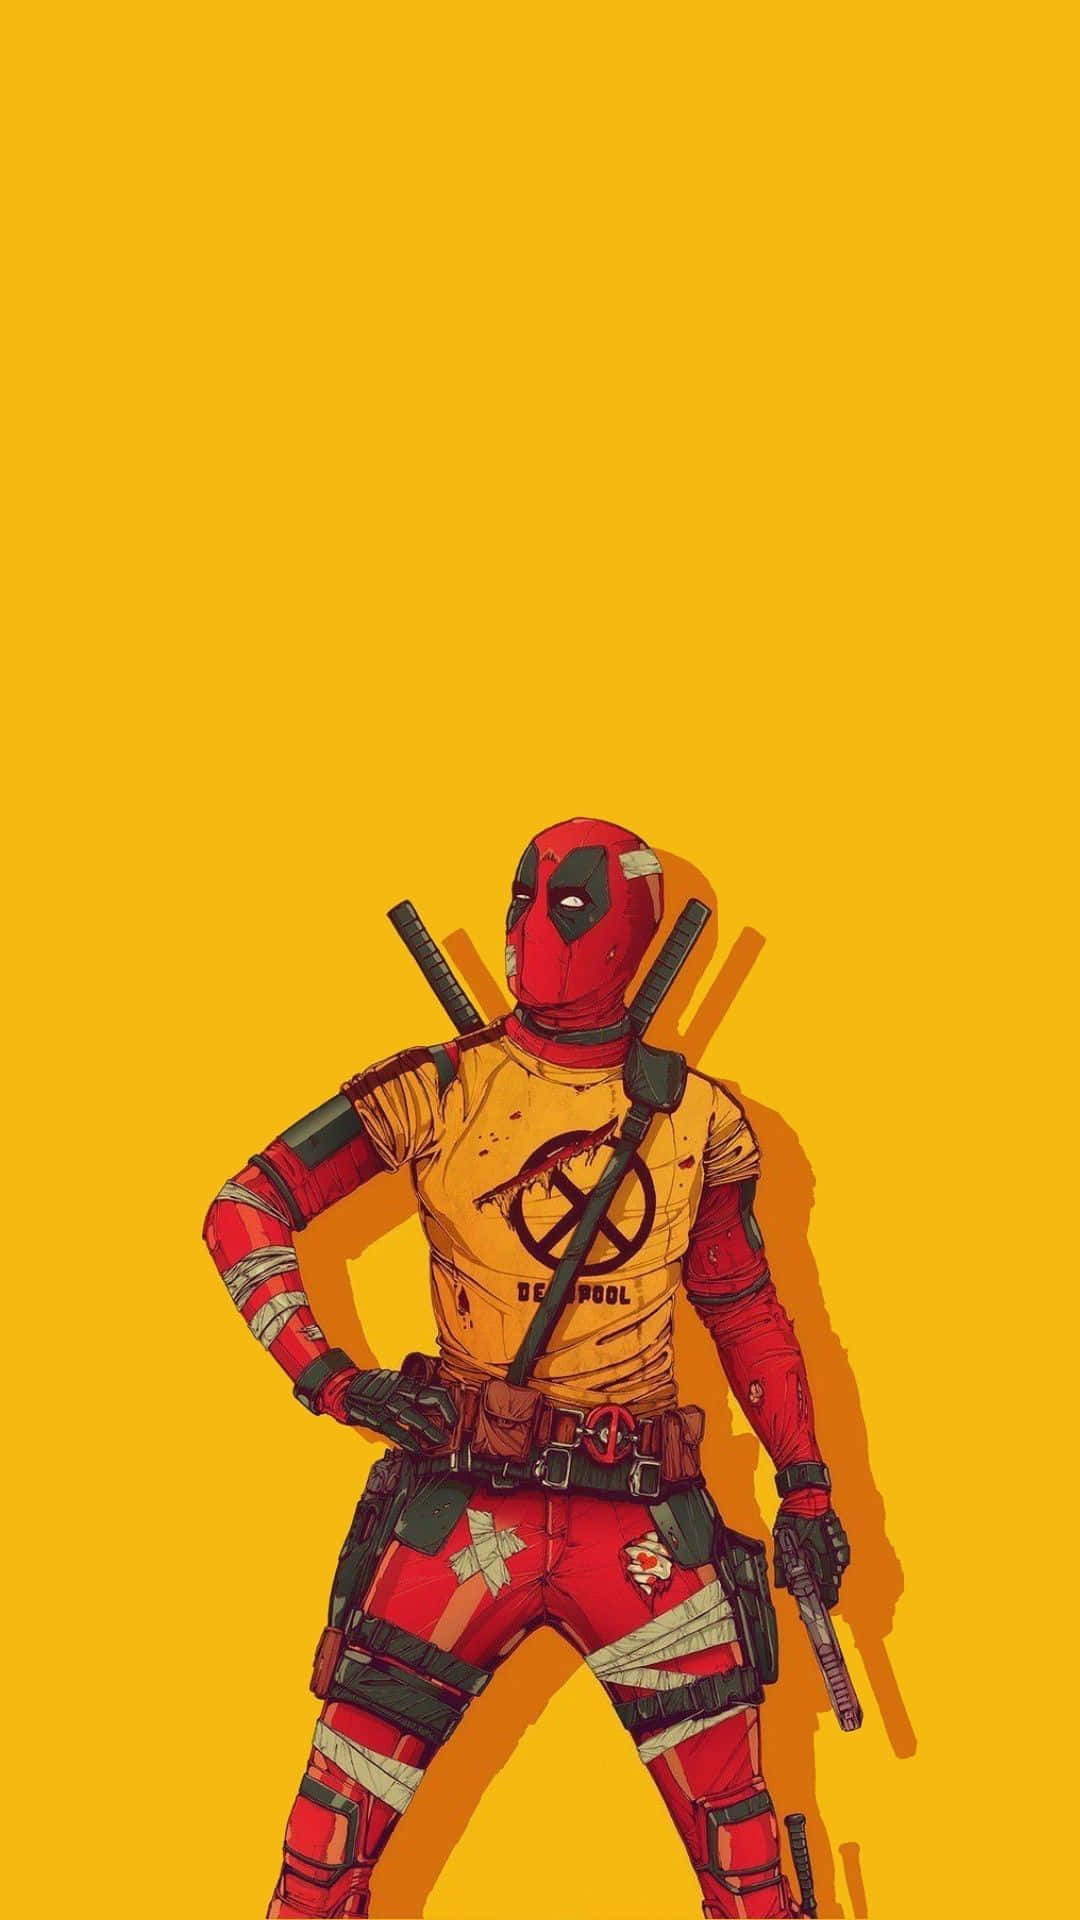 Get in touch with your cool side with a Deadpool Phone Wallpaper